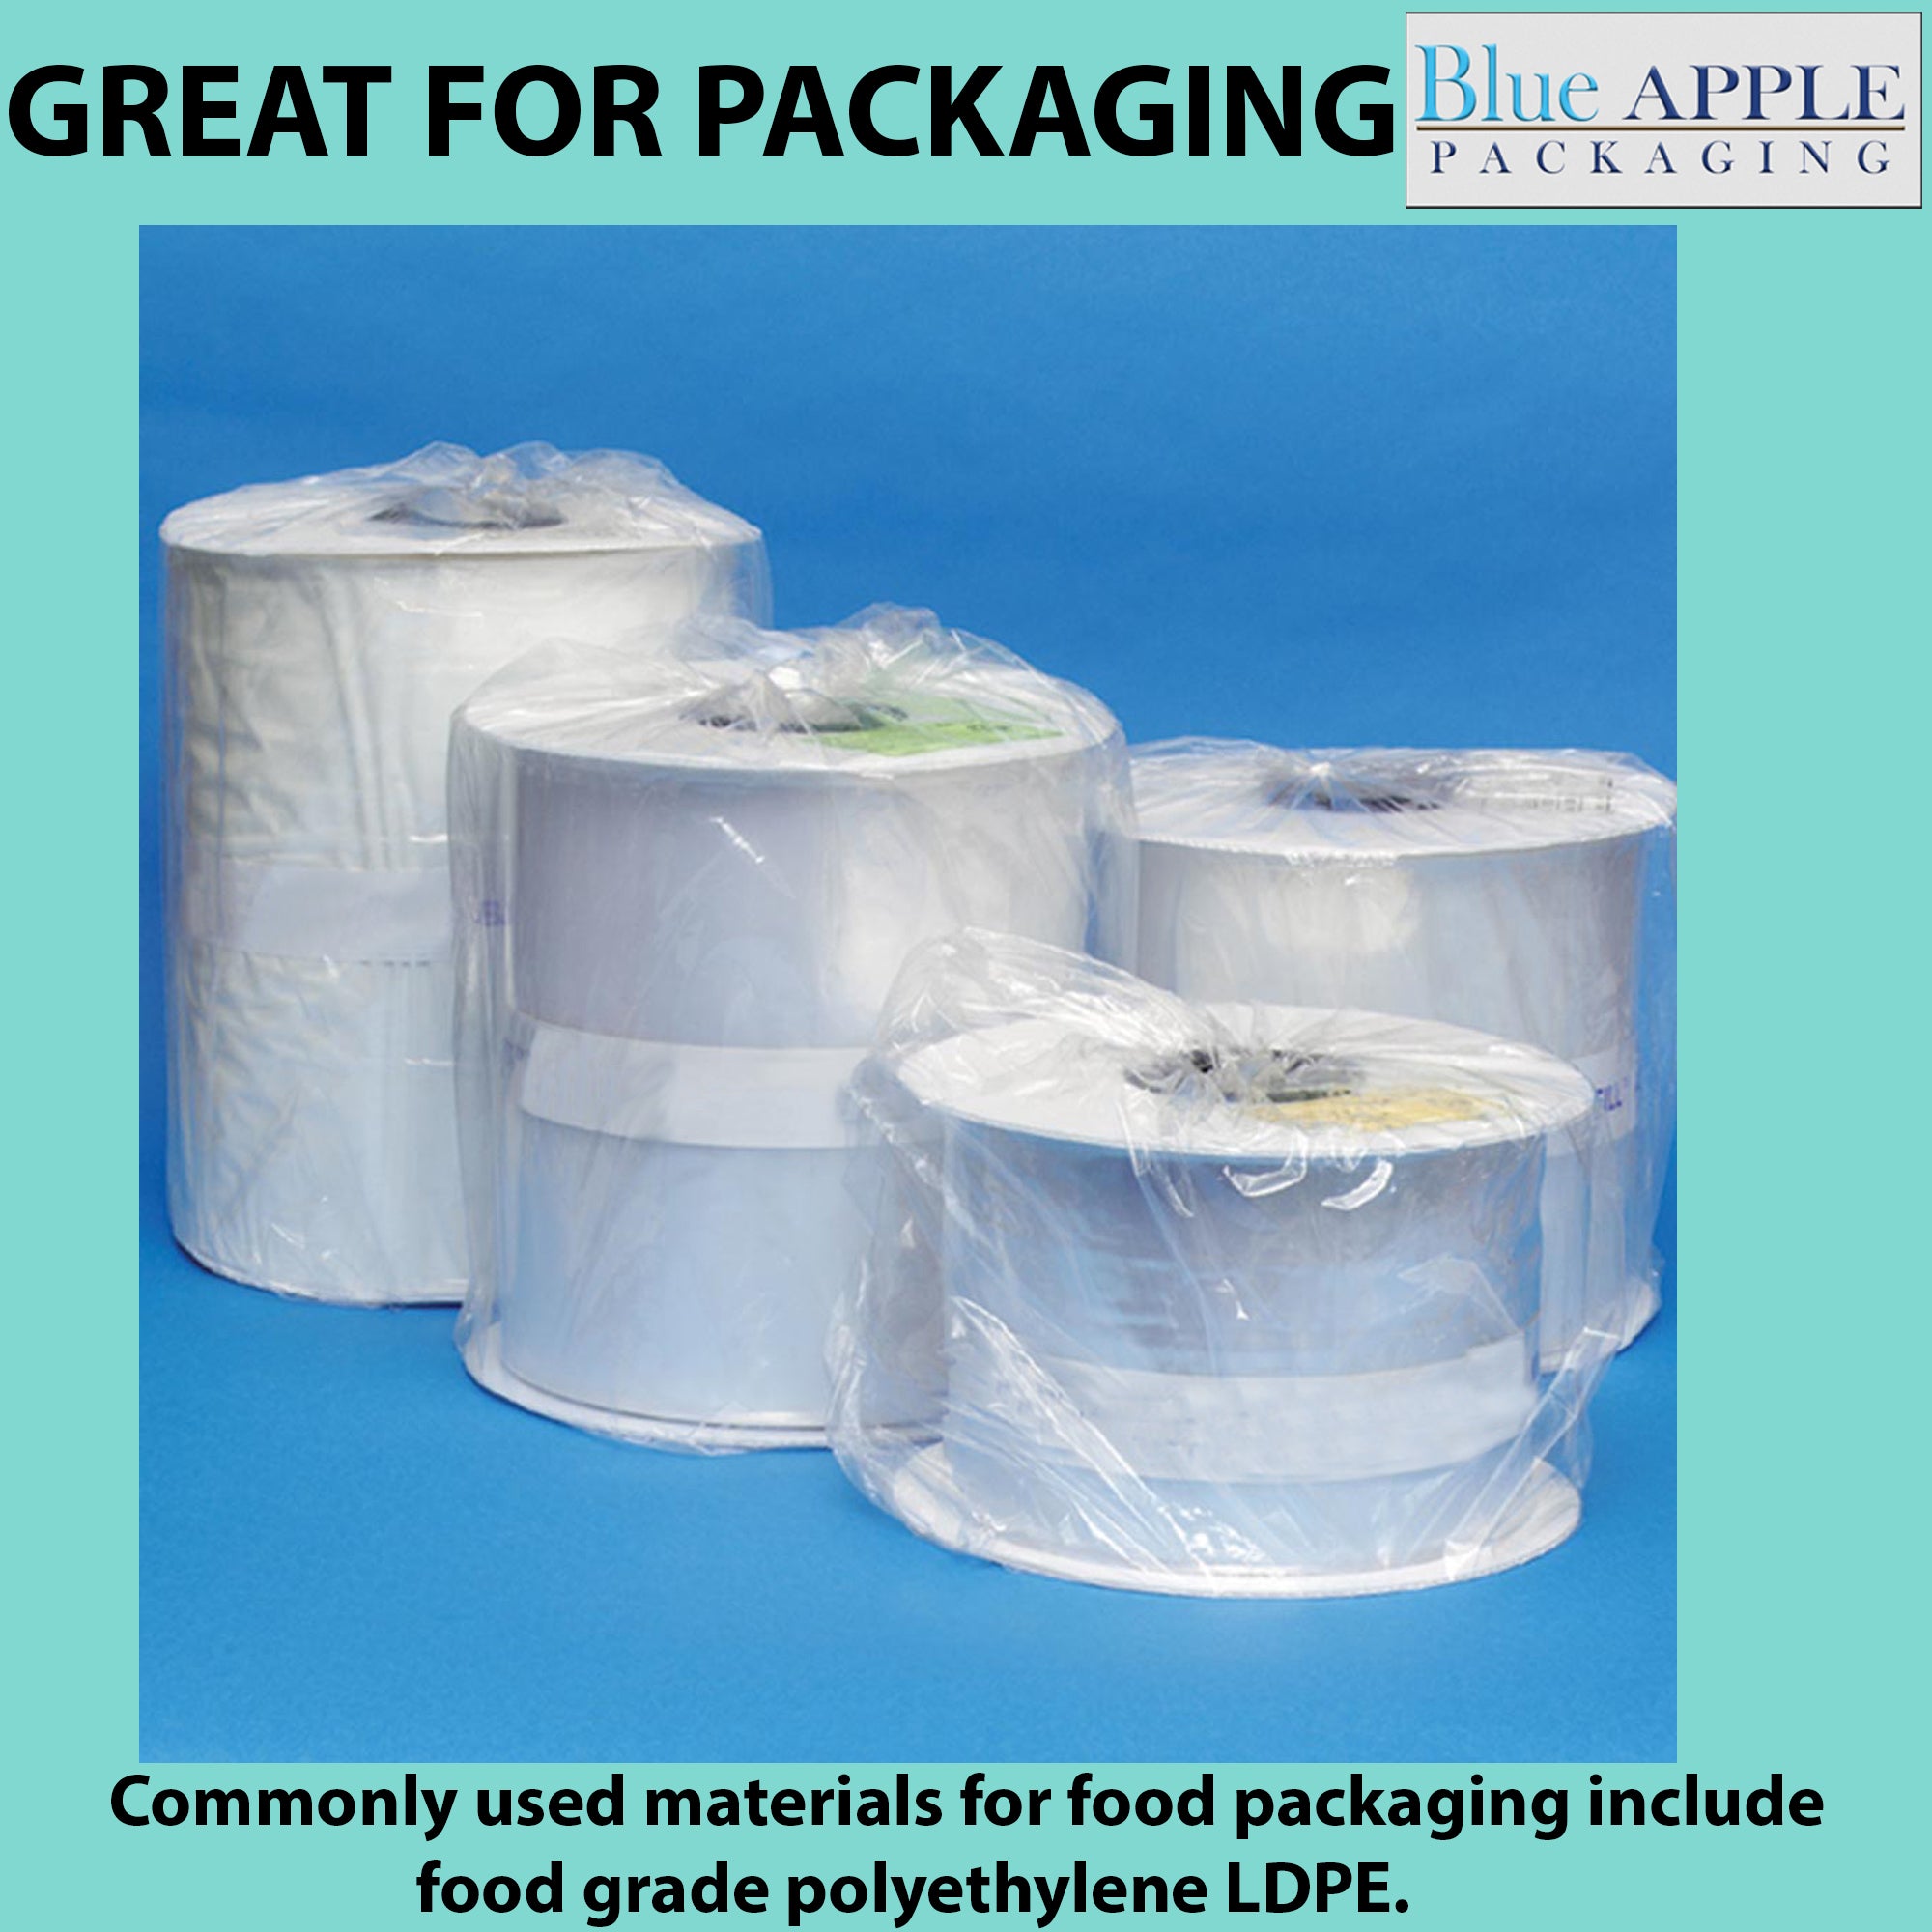 Autobag Heavy Perforated Roll Auto Fill Poly Bags- 6"x10", 2.75 Mil - 750 Bags